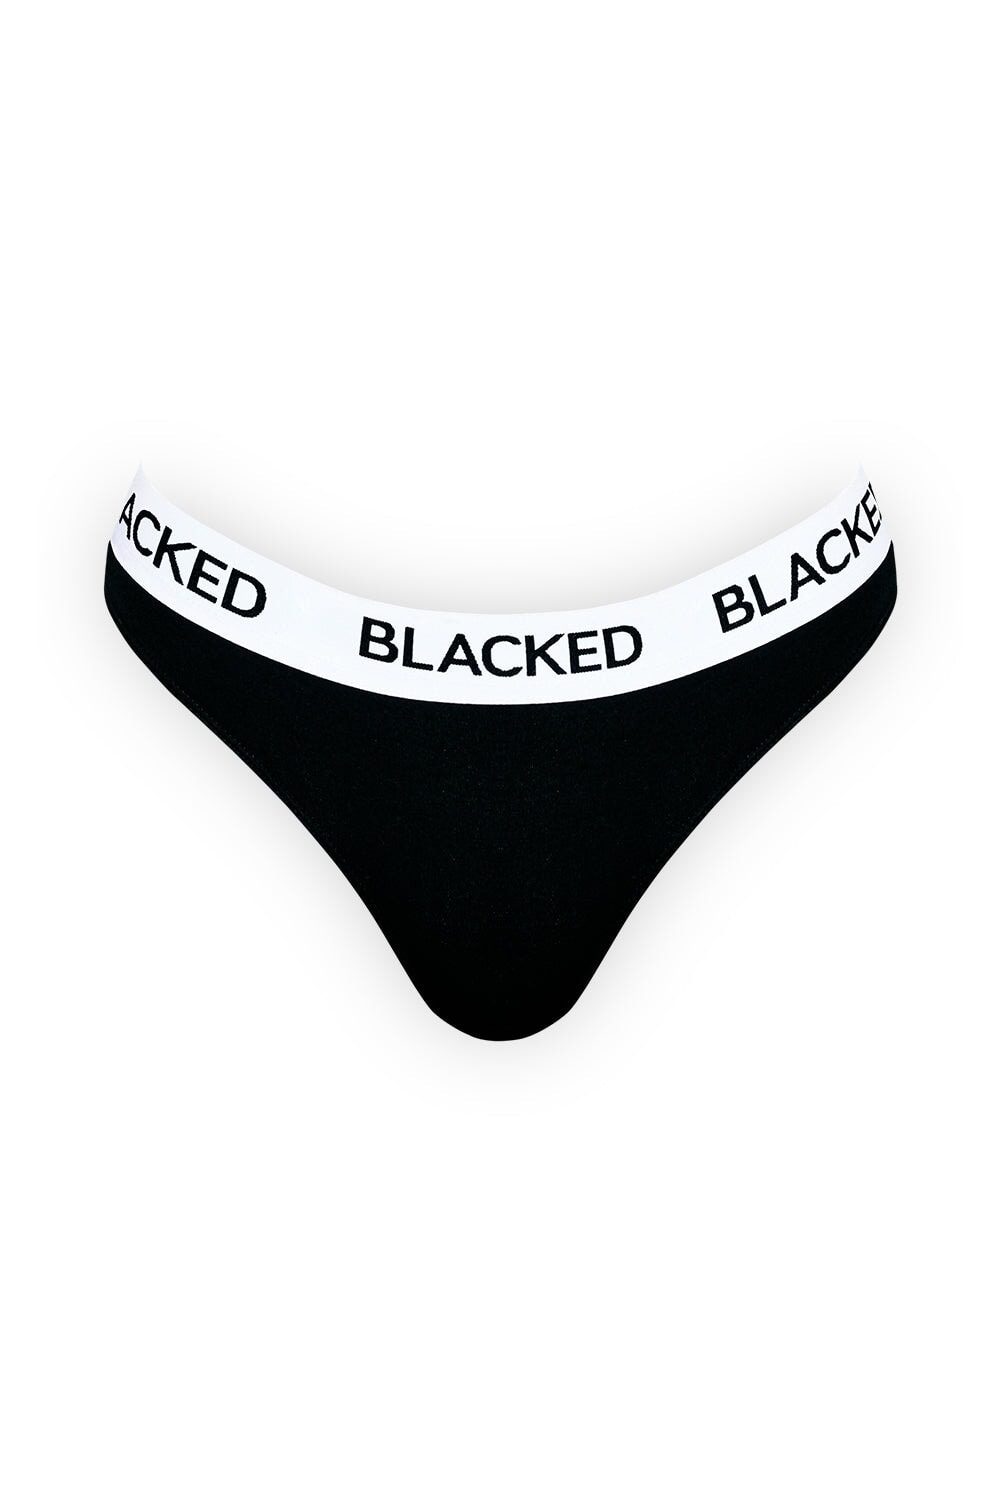 Blacked Thong Panty Lingerie Blacked 